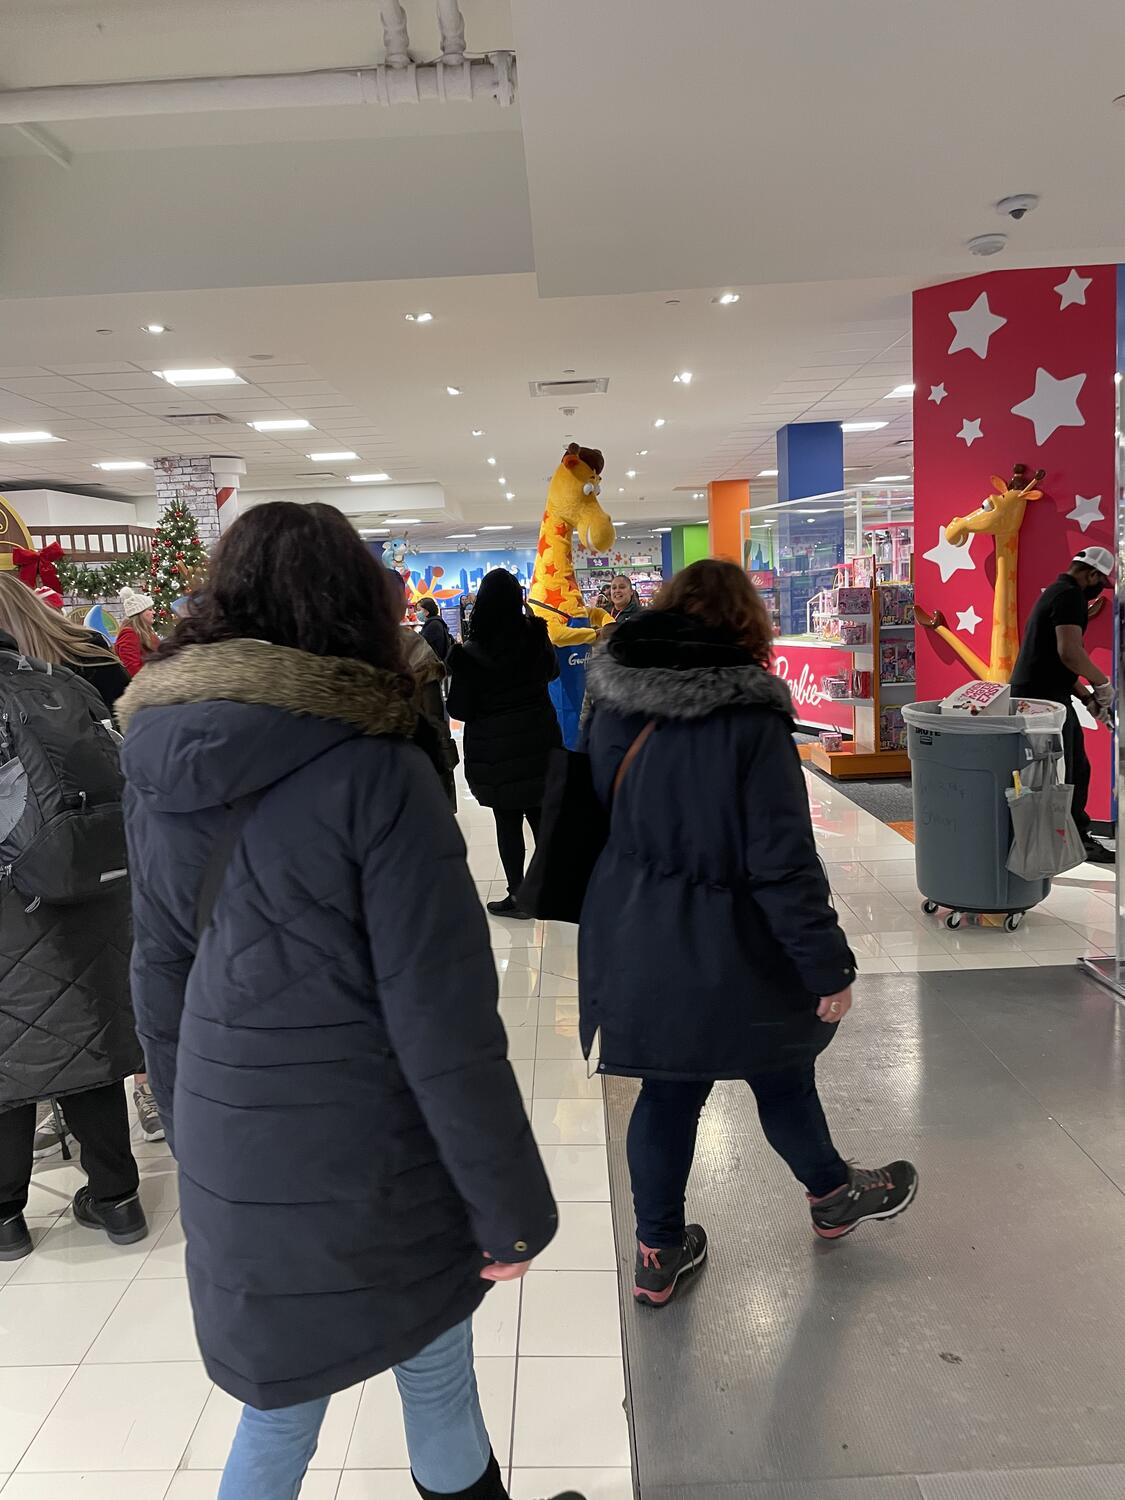 Lots of kids excitedly gathering around a giraffe mascot in the toy section of a department store